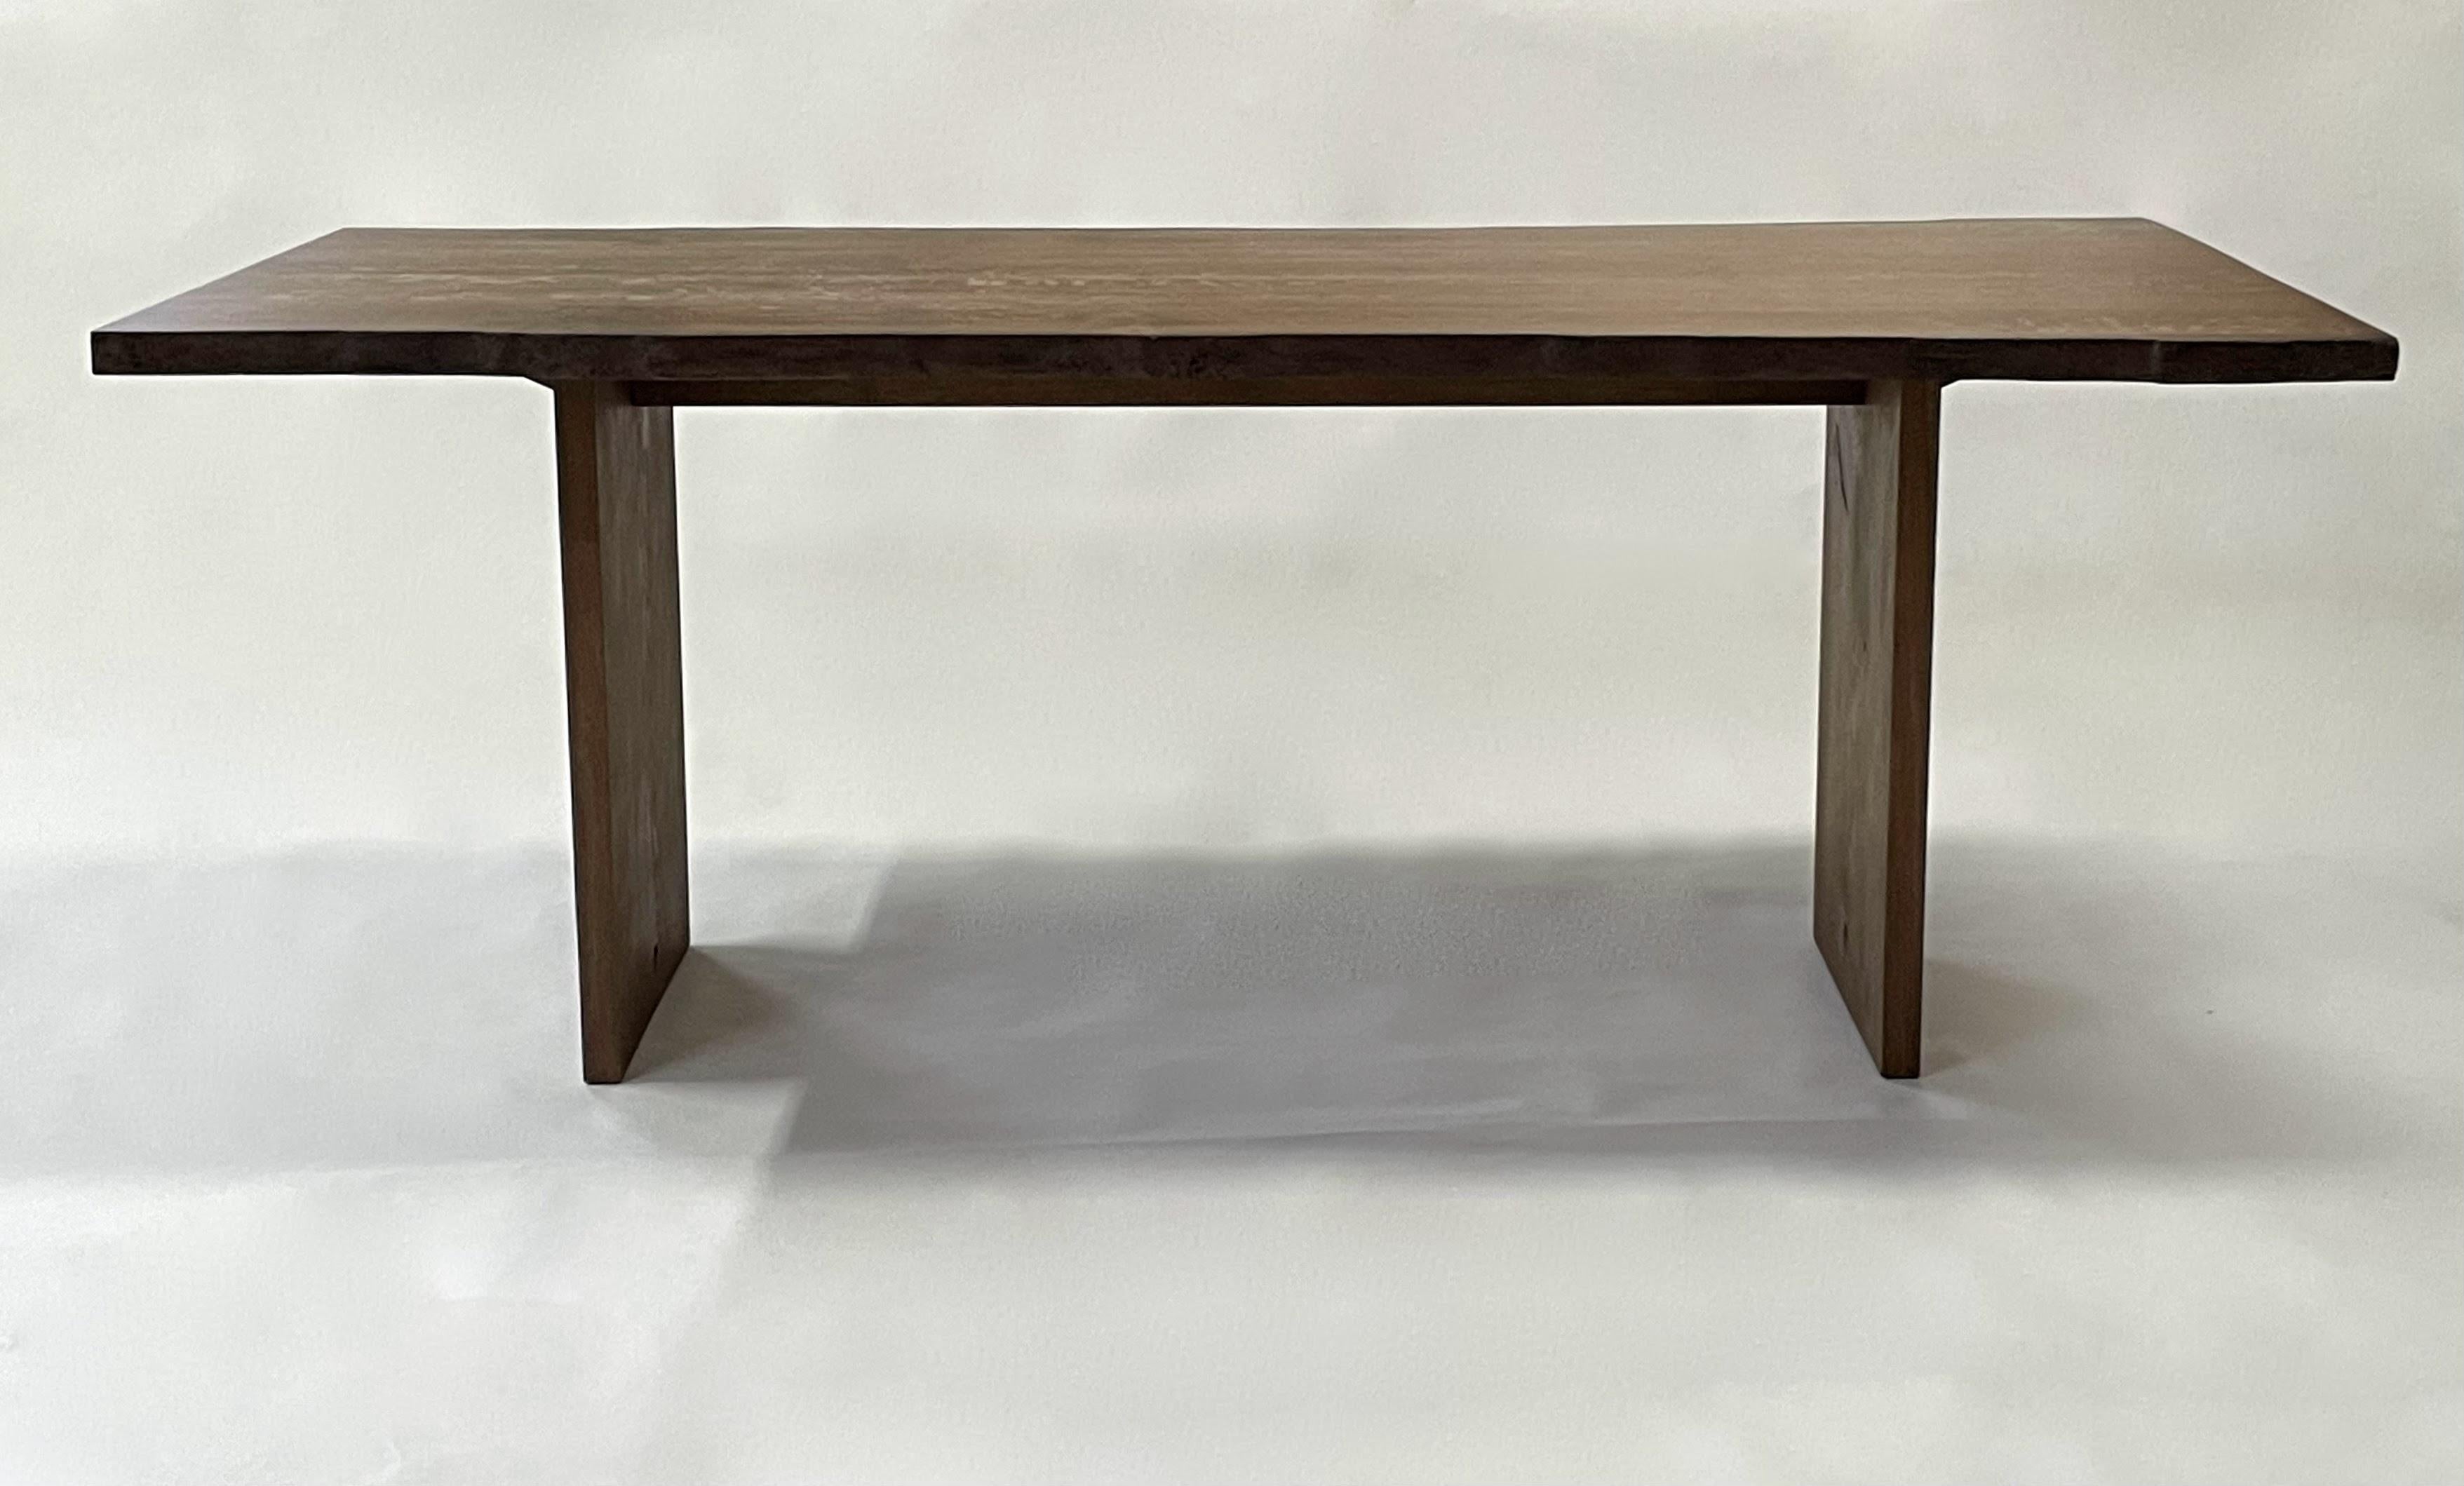 The ADDITIONS tables 
 
The ADDITIONS tables are made to order and are designed to have a simplicity of line and structure.
Each table is made from carefully selected book-matched solid English oak with the live edge (waney Edge) running down each